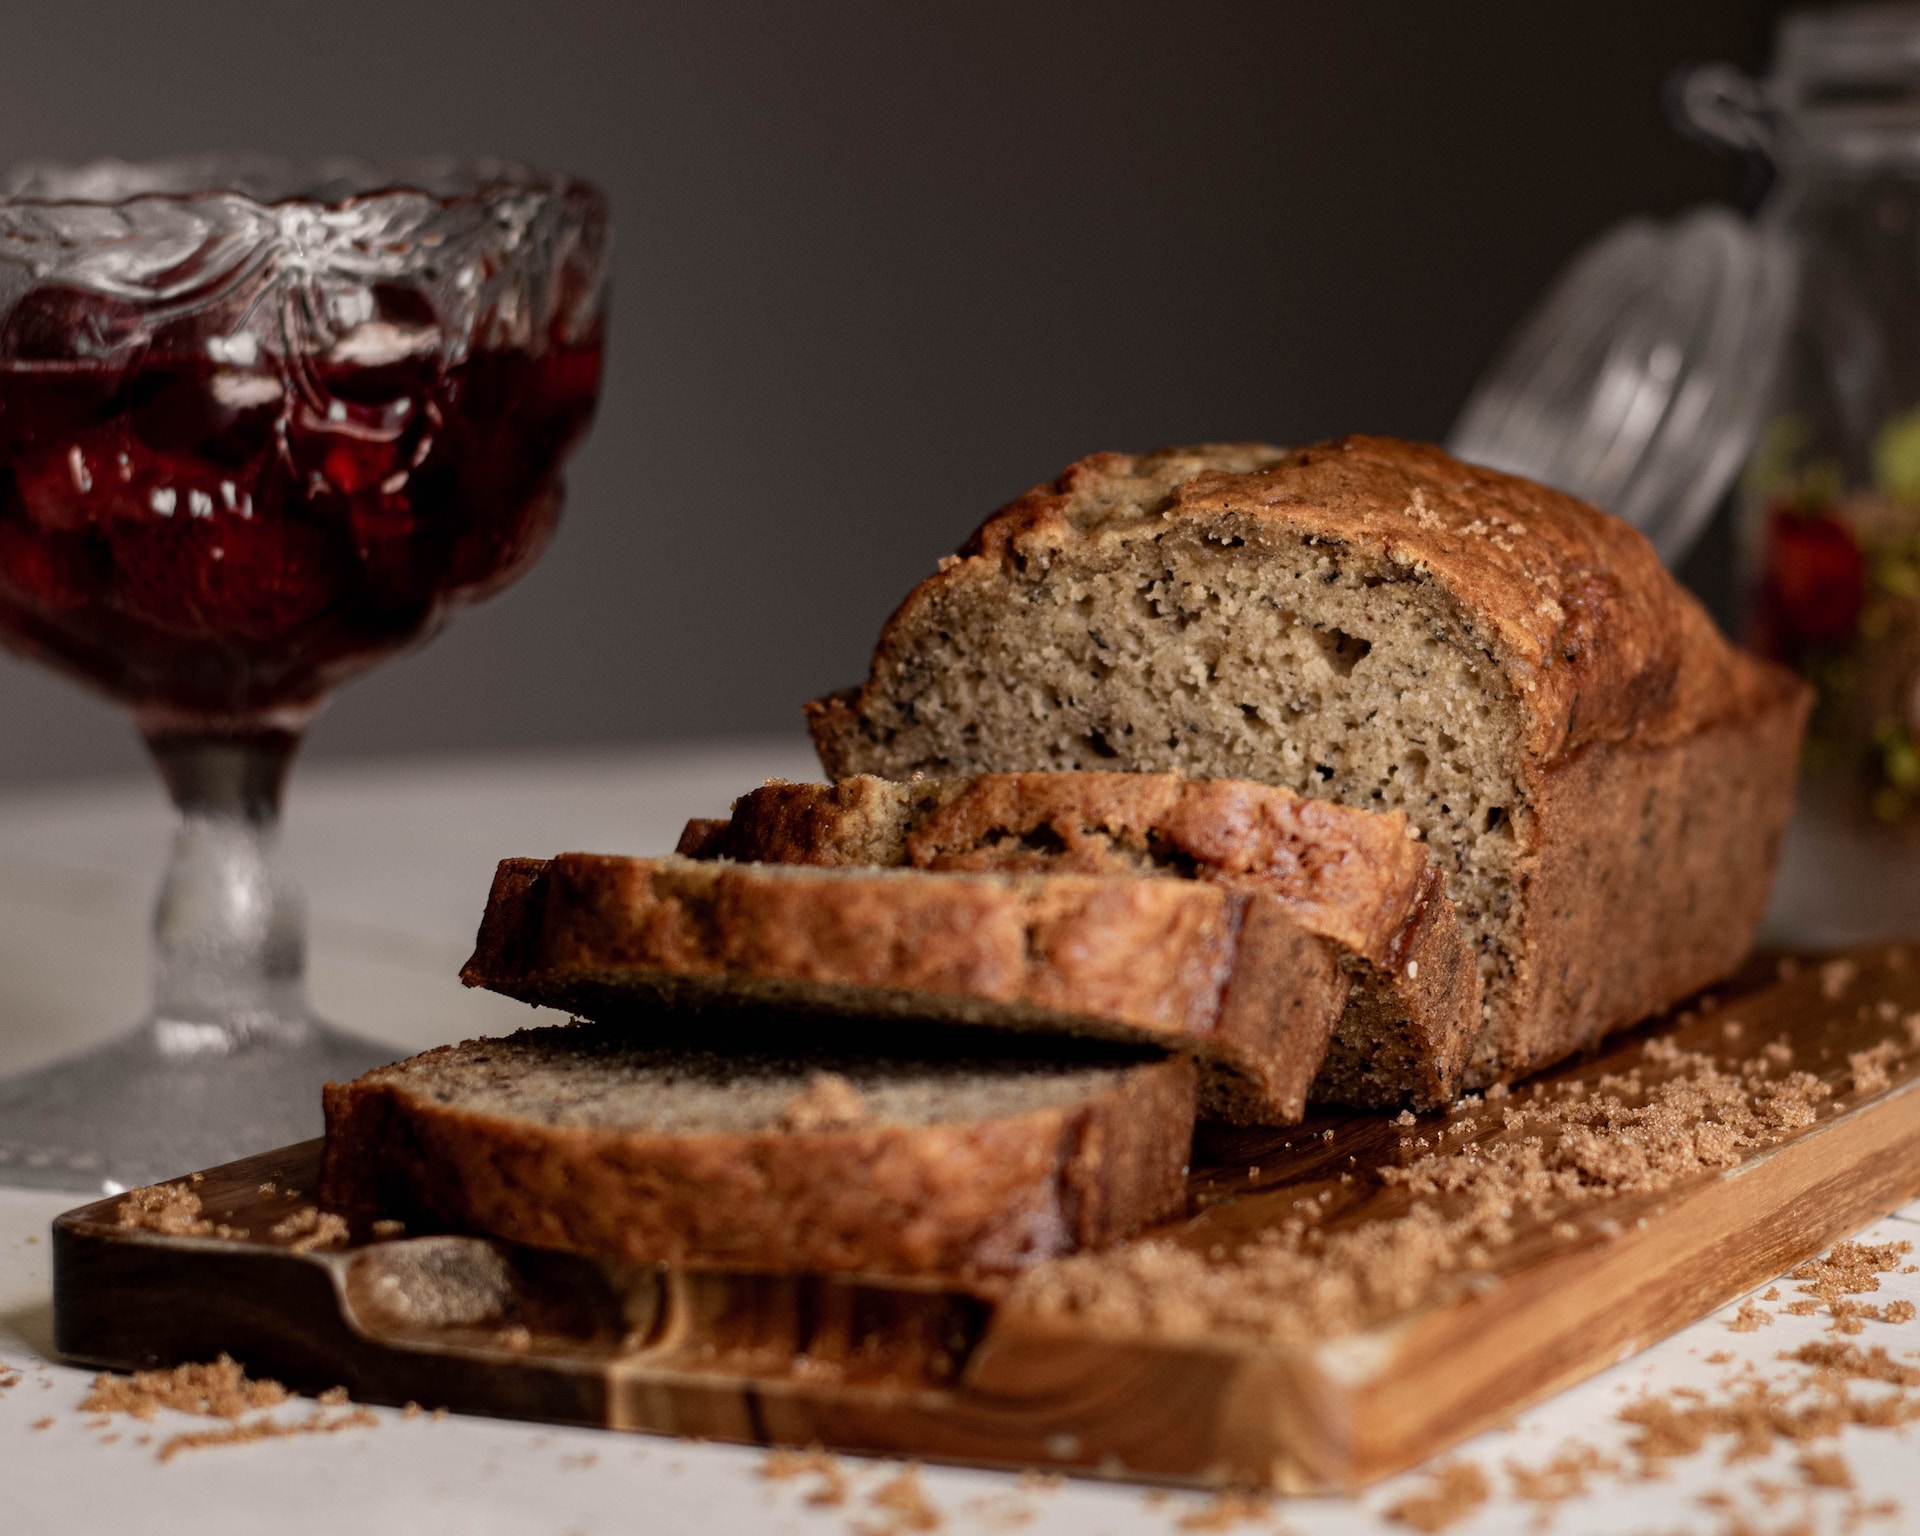 Craving some warm banana bread but don't want to bake an entire loaf? Then this mug recipe is perfect for you. Mash one ripe banana, then add 3 tablespoons of flour, 3 tablespoons of sugar, and 1 egg. Mix well and microwave in a mug for 2-3 minutes. Craving satisfied.